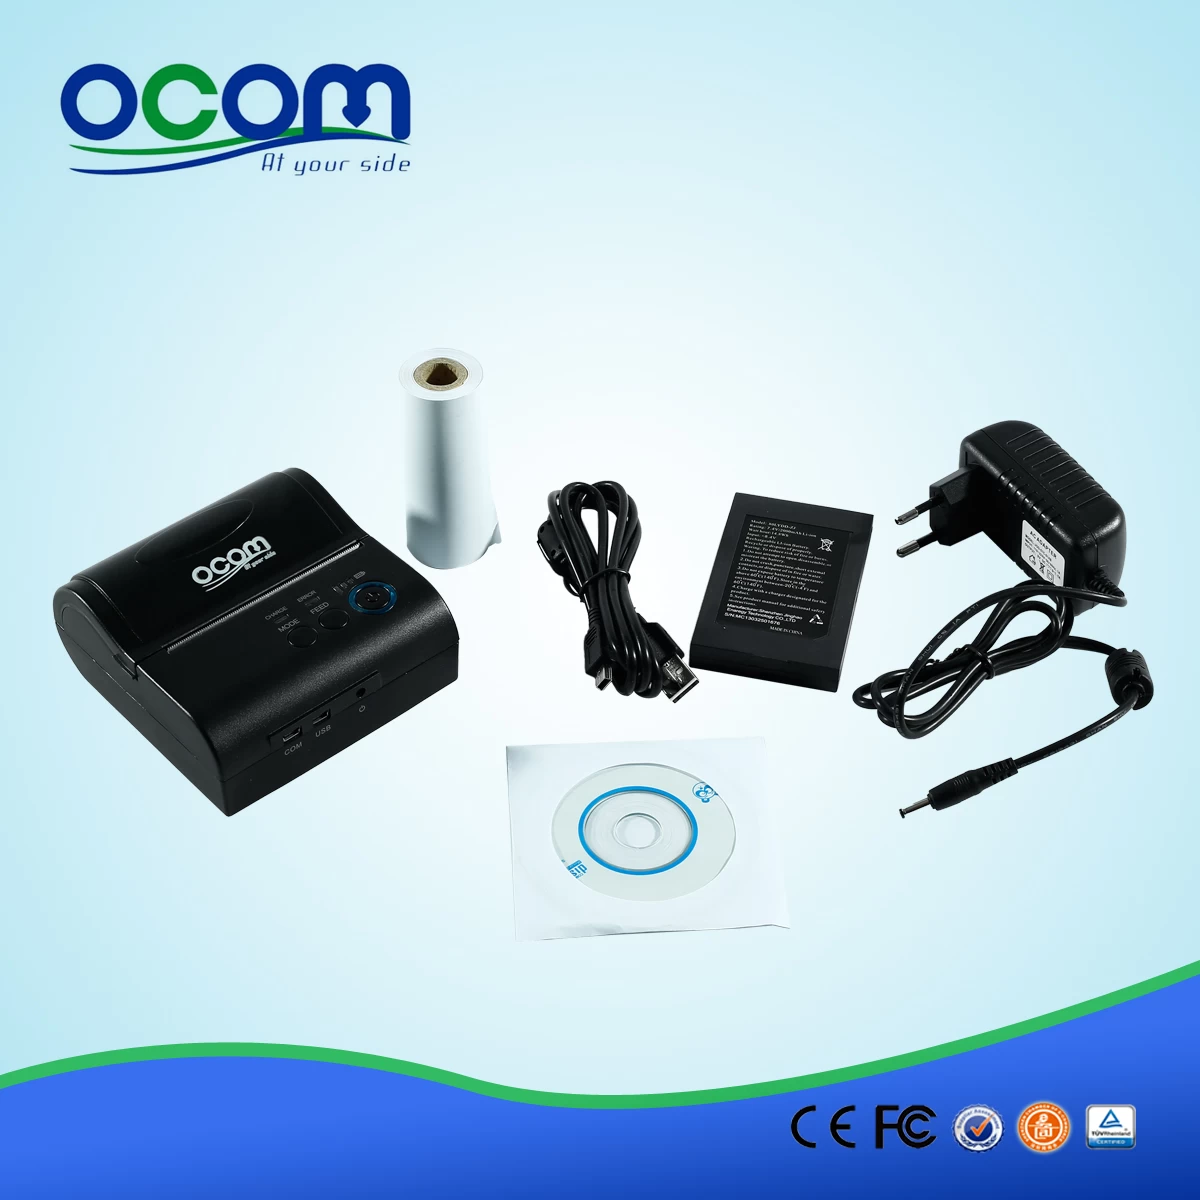 OCPP-M082: 80MM Bluetooth Printer Support Android, Windows, Linux, With SDK